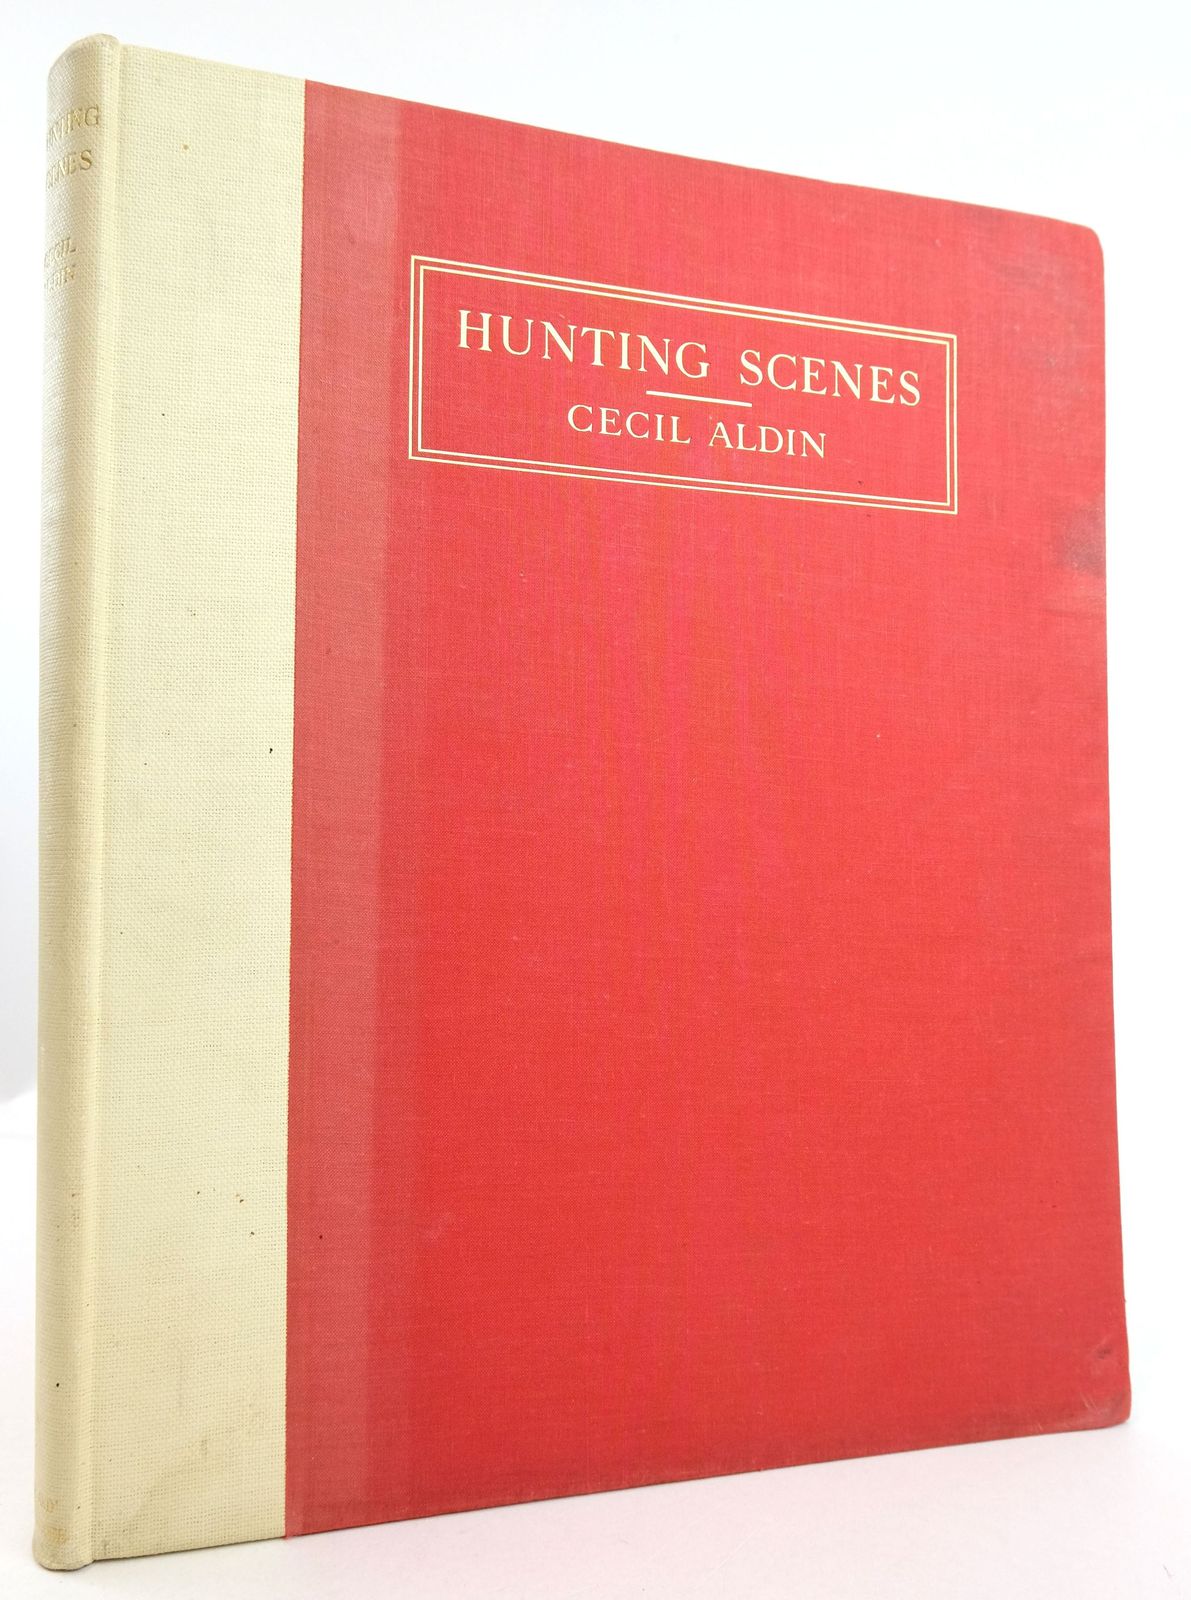 Photo of HUNTING SCENES written by Sabretache,  illustrated by Aldin, Cecil published by Eyre & Spottiswoode (STOCK CODE: 1819649)  for sale by Stella & Rose's Books